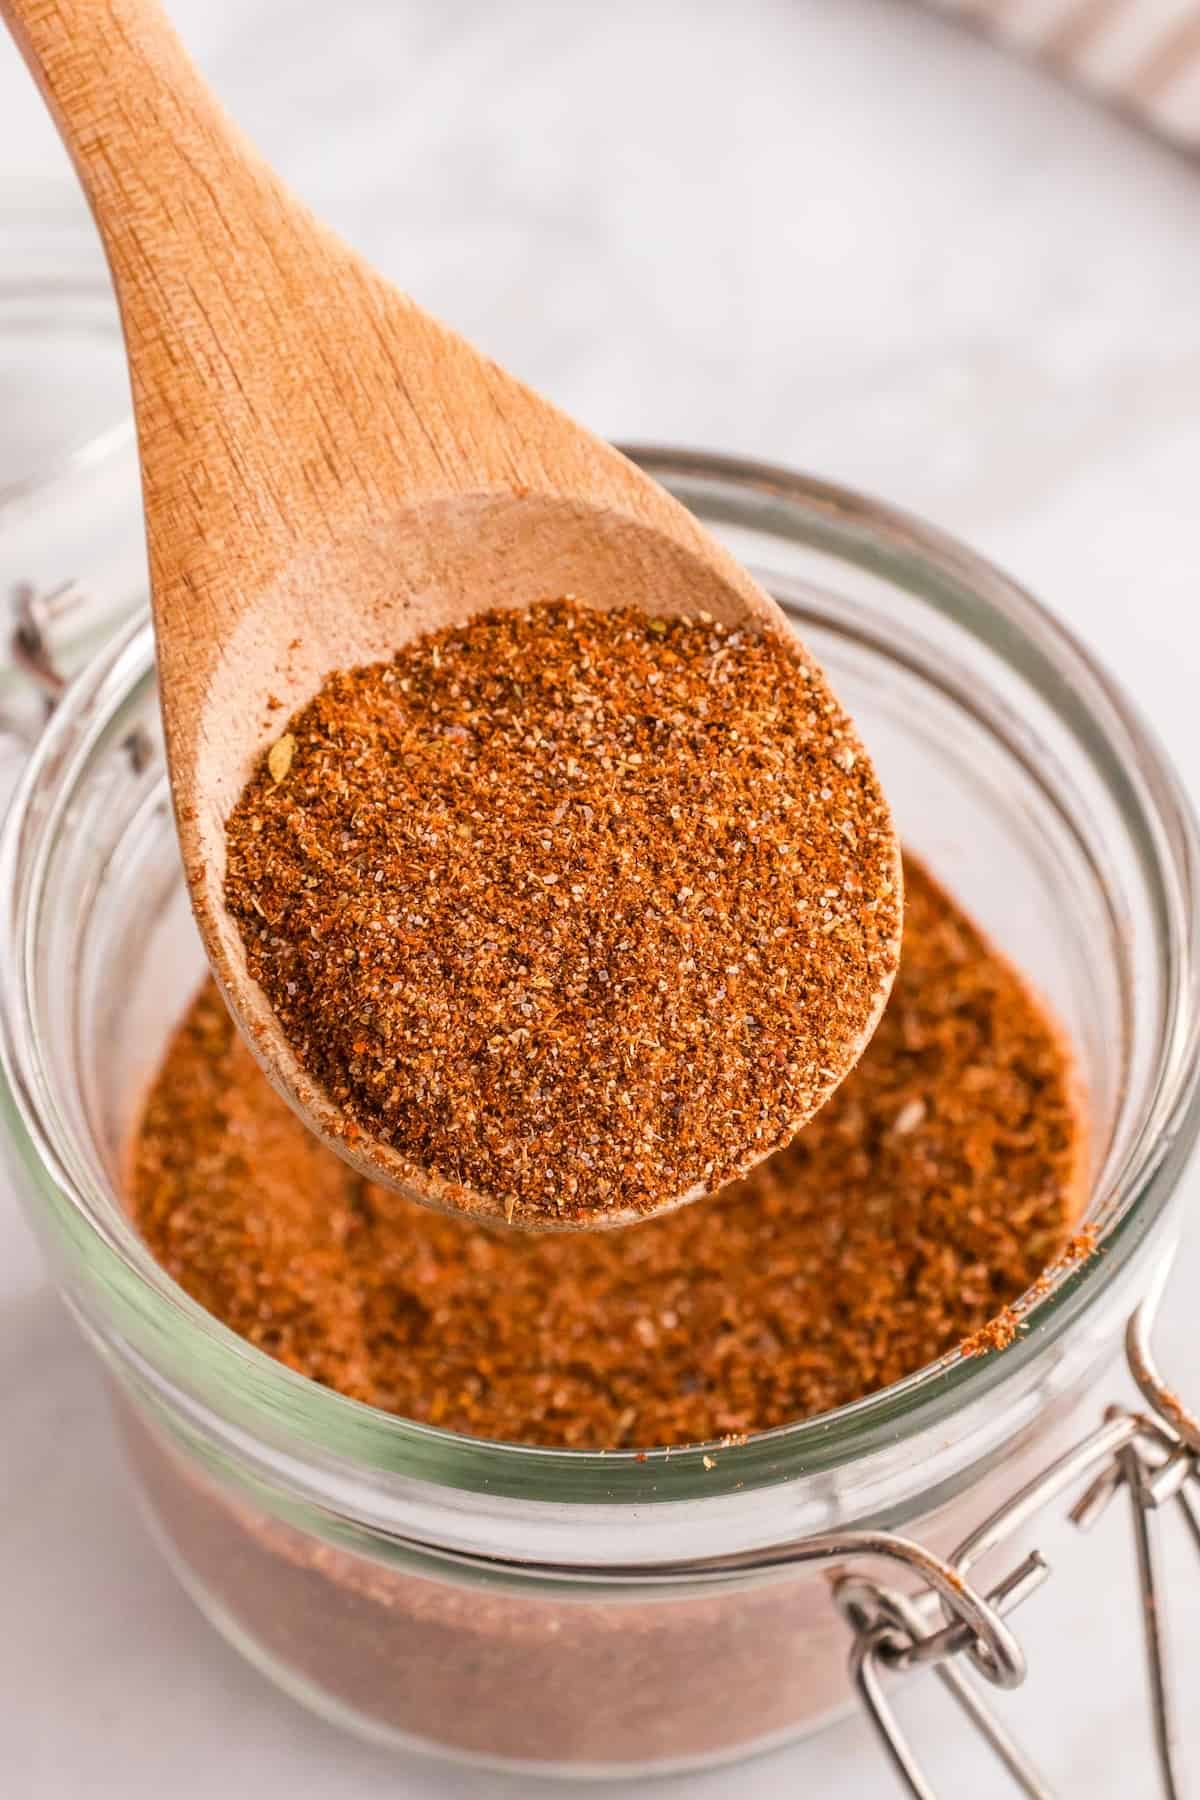 A wooden spoon scooping out some taco seasoning.